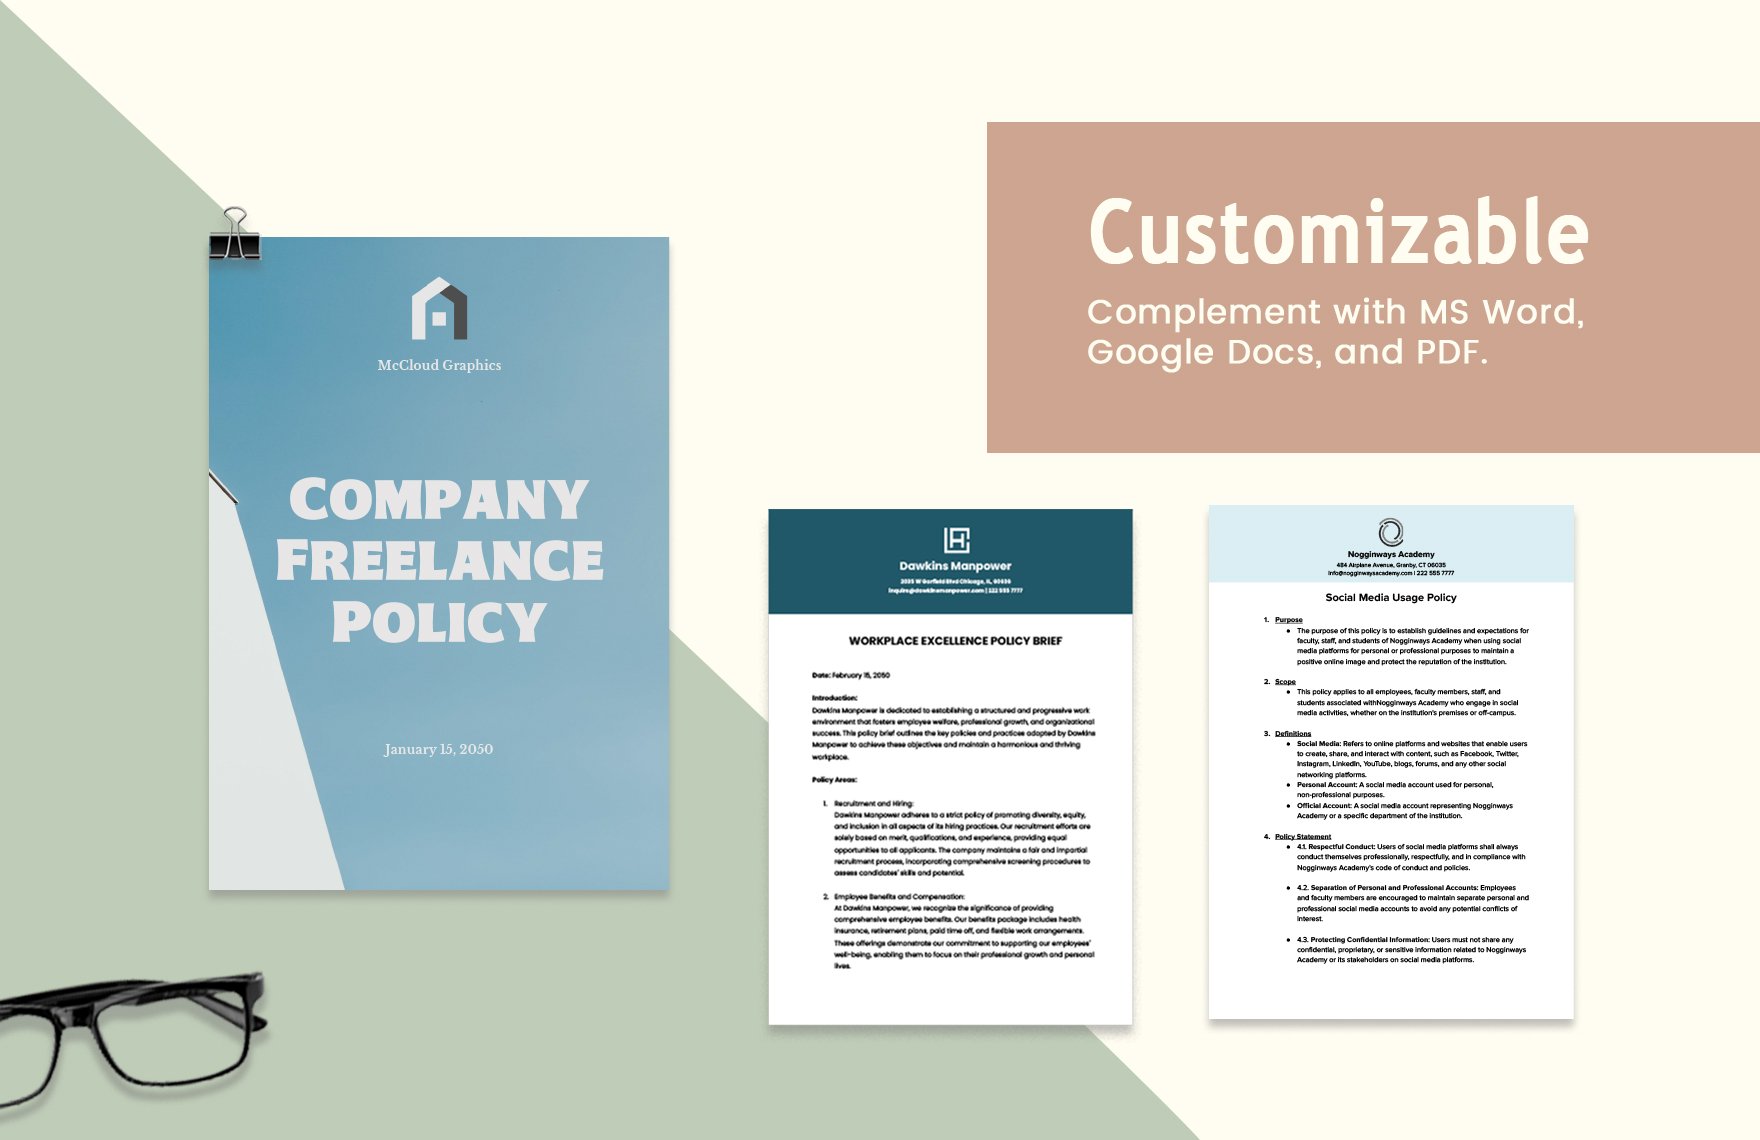 10+ Policy Template Bundle